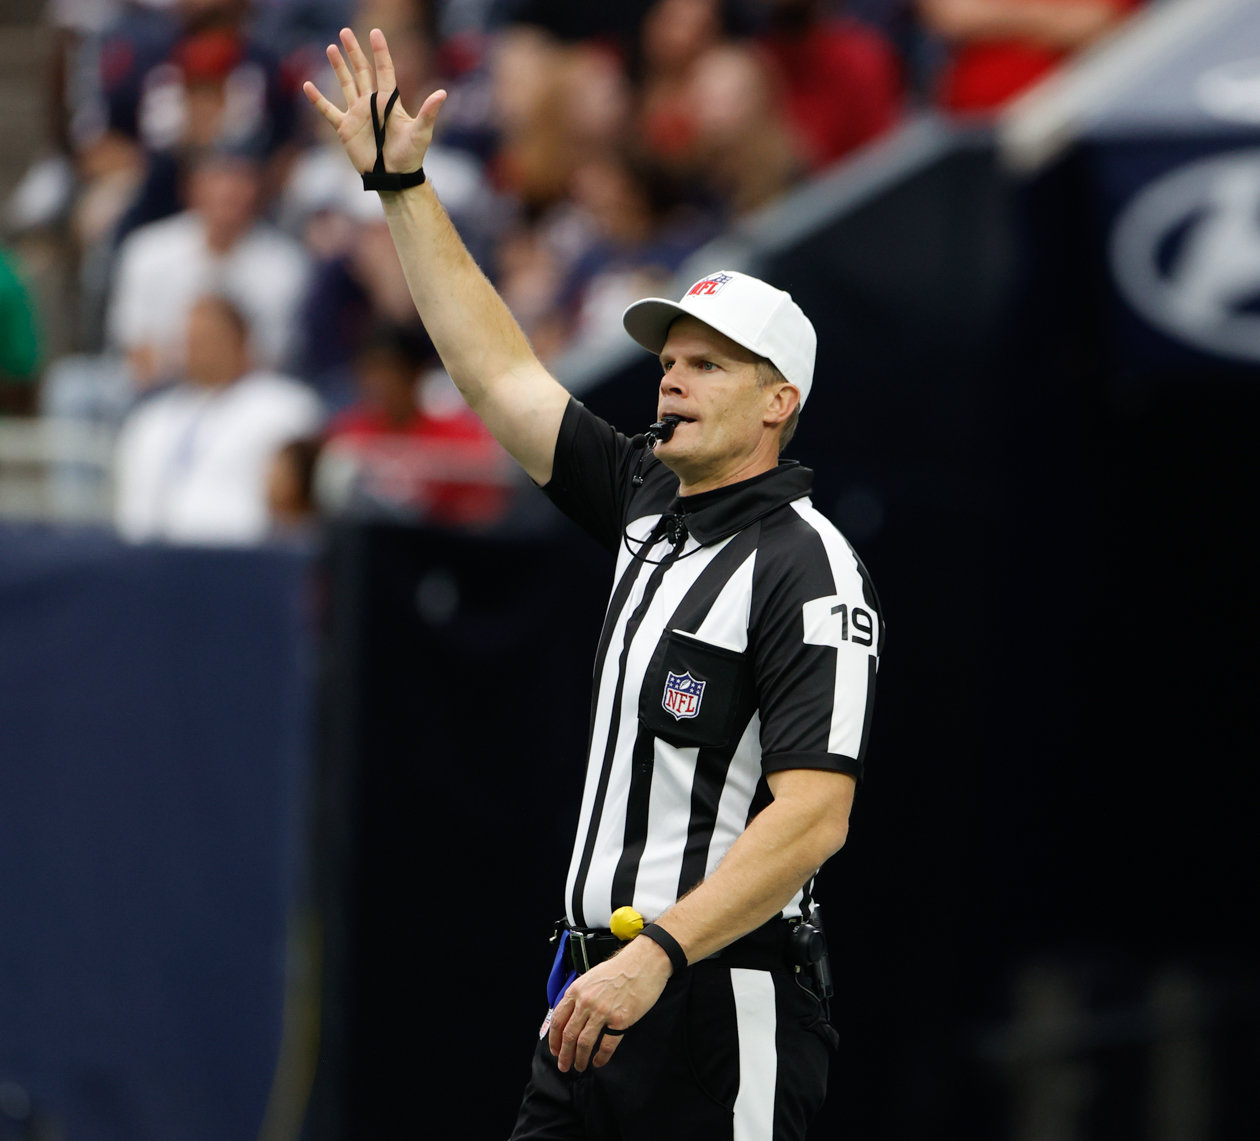 Referee Clay Martin (19) during an NFL game between the Texans and the Titans on Oct. 30, 2022 in Houston.